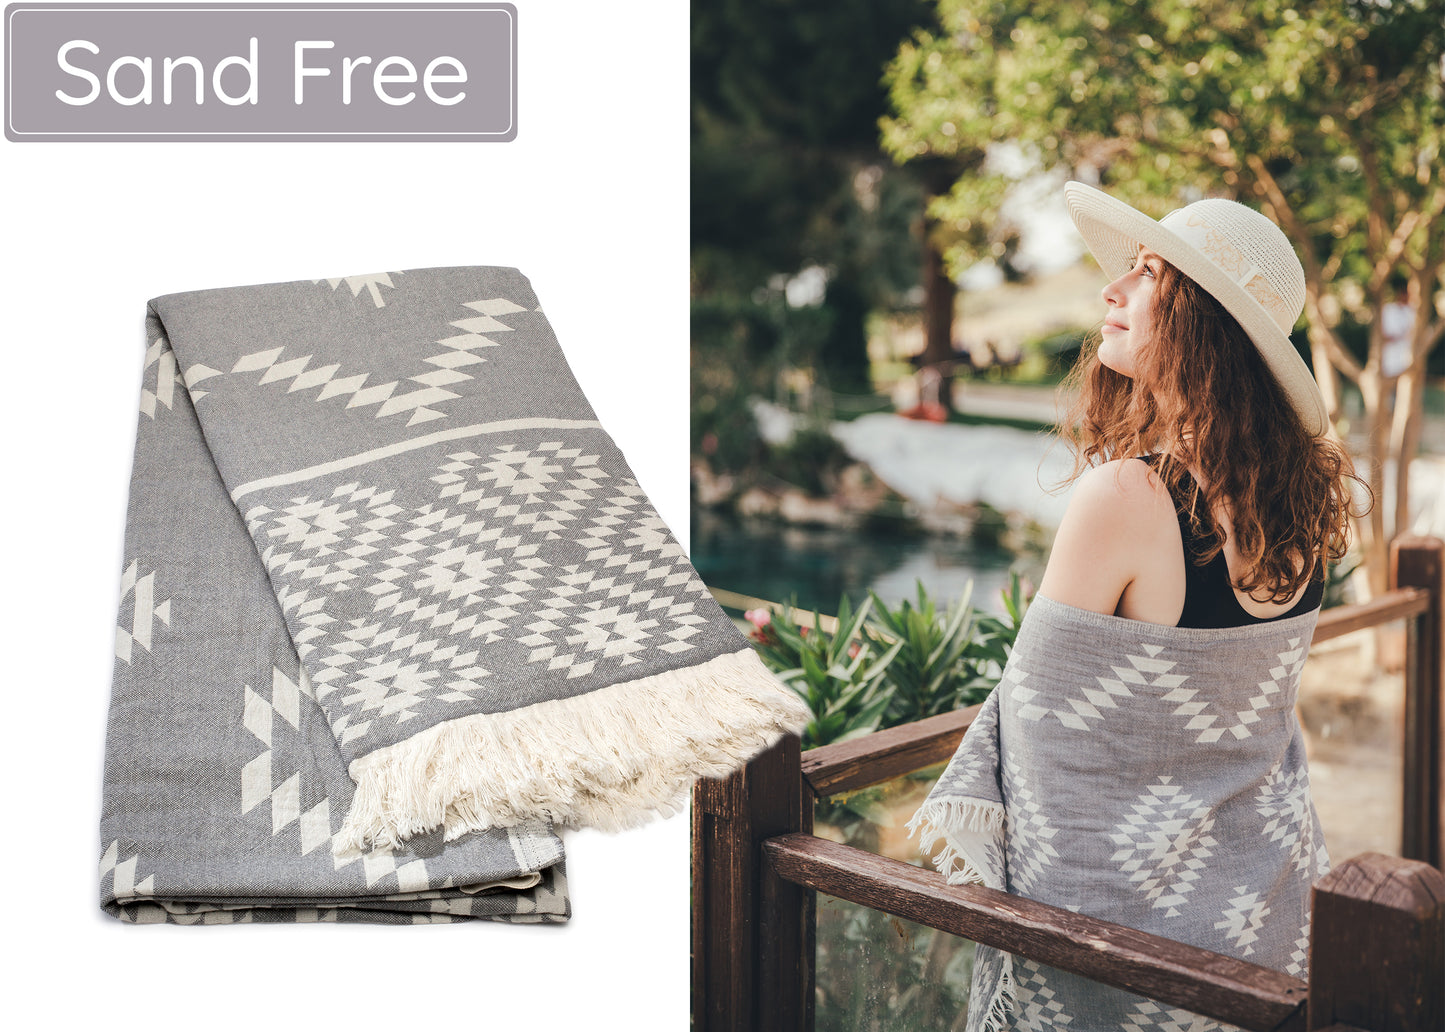 Dark Grey Turkish Beach Towel (35”x67”)  Lightweight, Quick drying and Sand Free Can be Used as Beach Blanket 100% Cotton Vintage Design